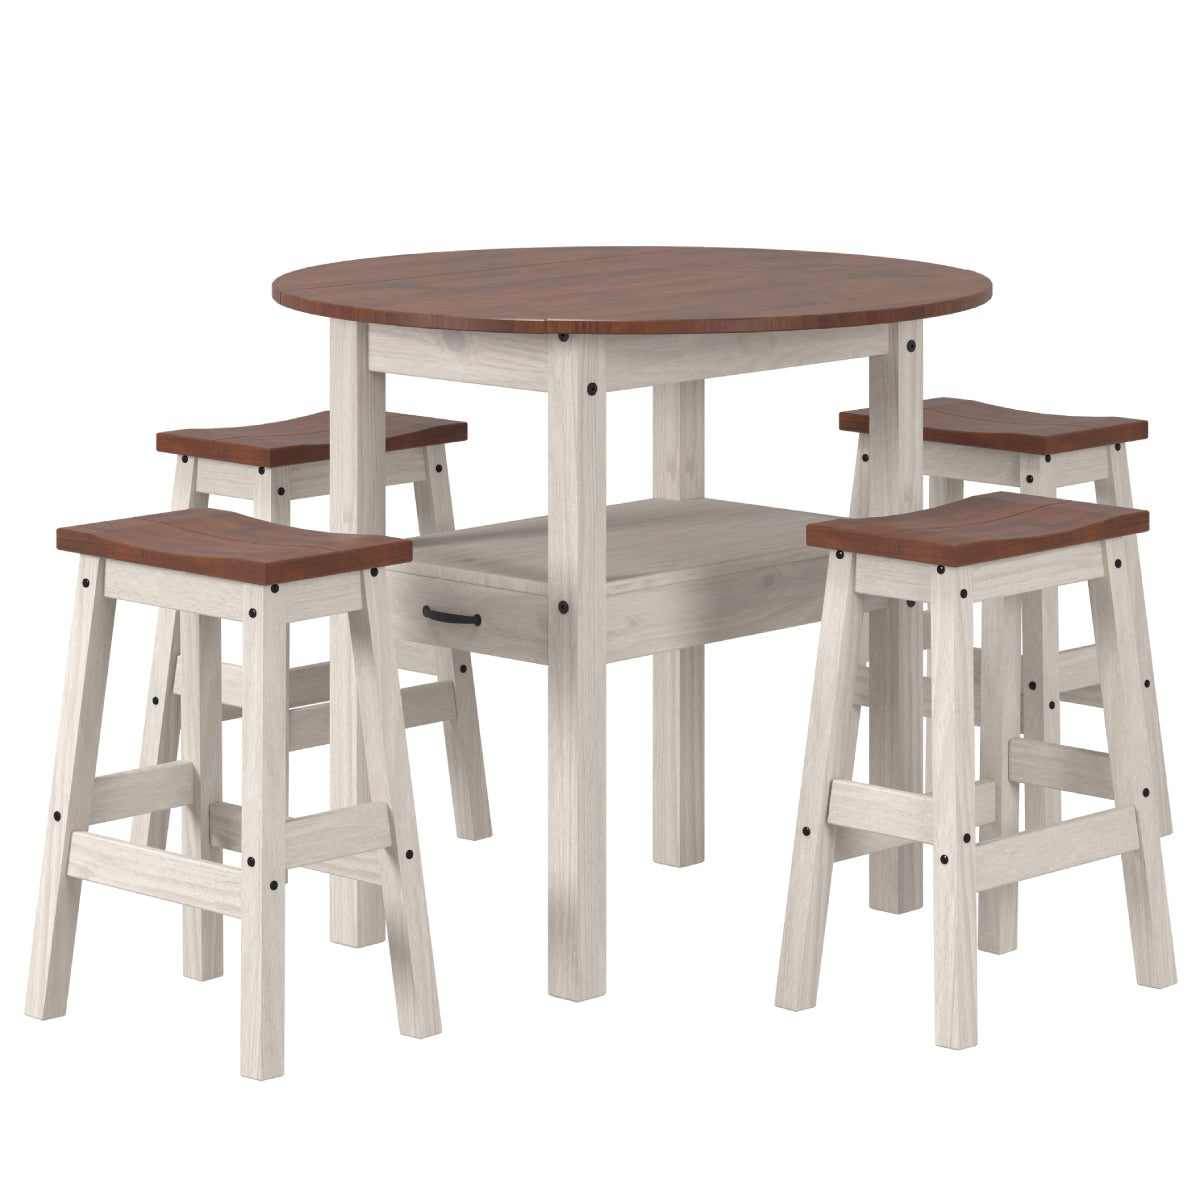 Bar Height Dining Set of Drop Leaf Table and 4 Stools | Furniture Dash